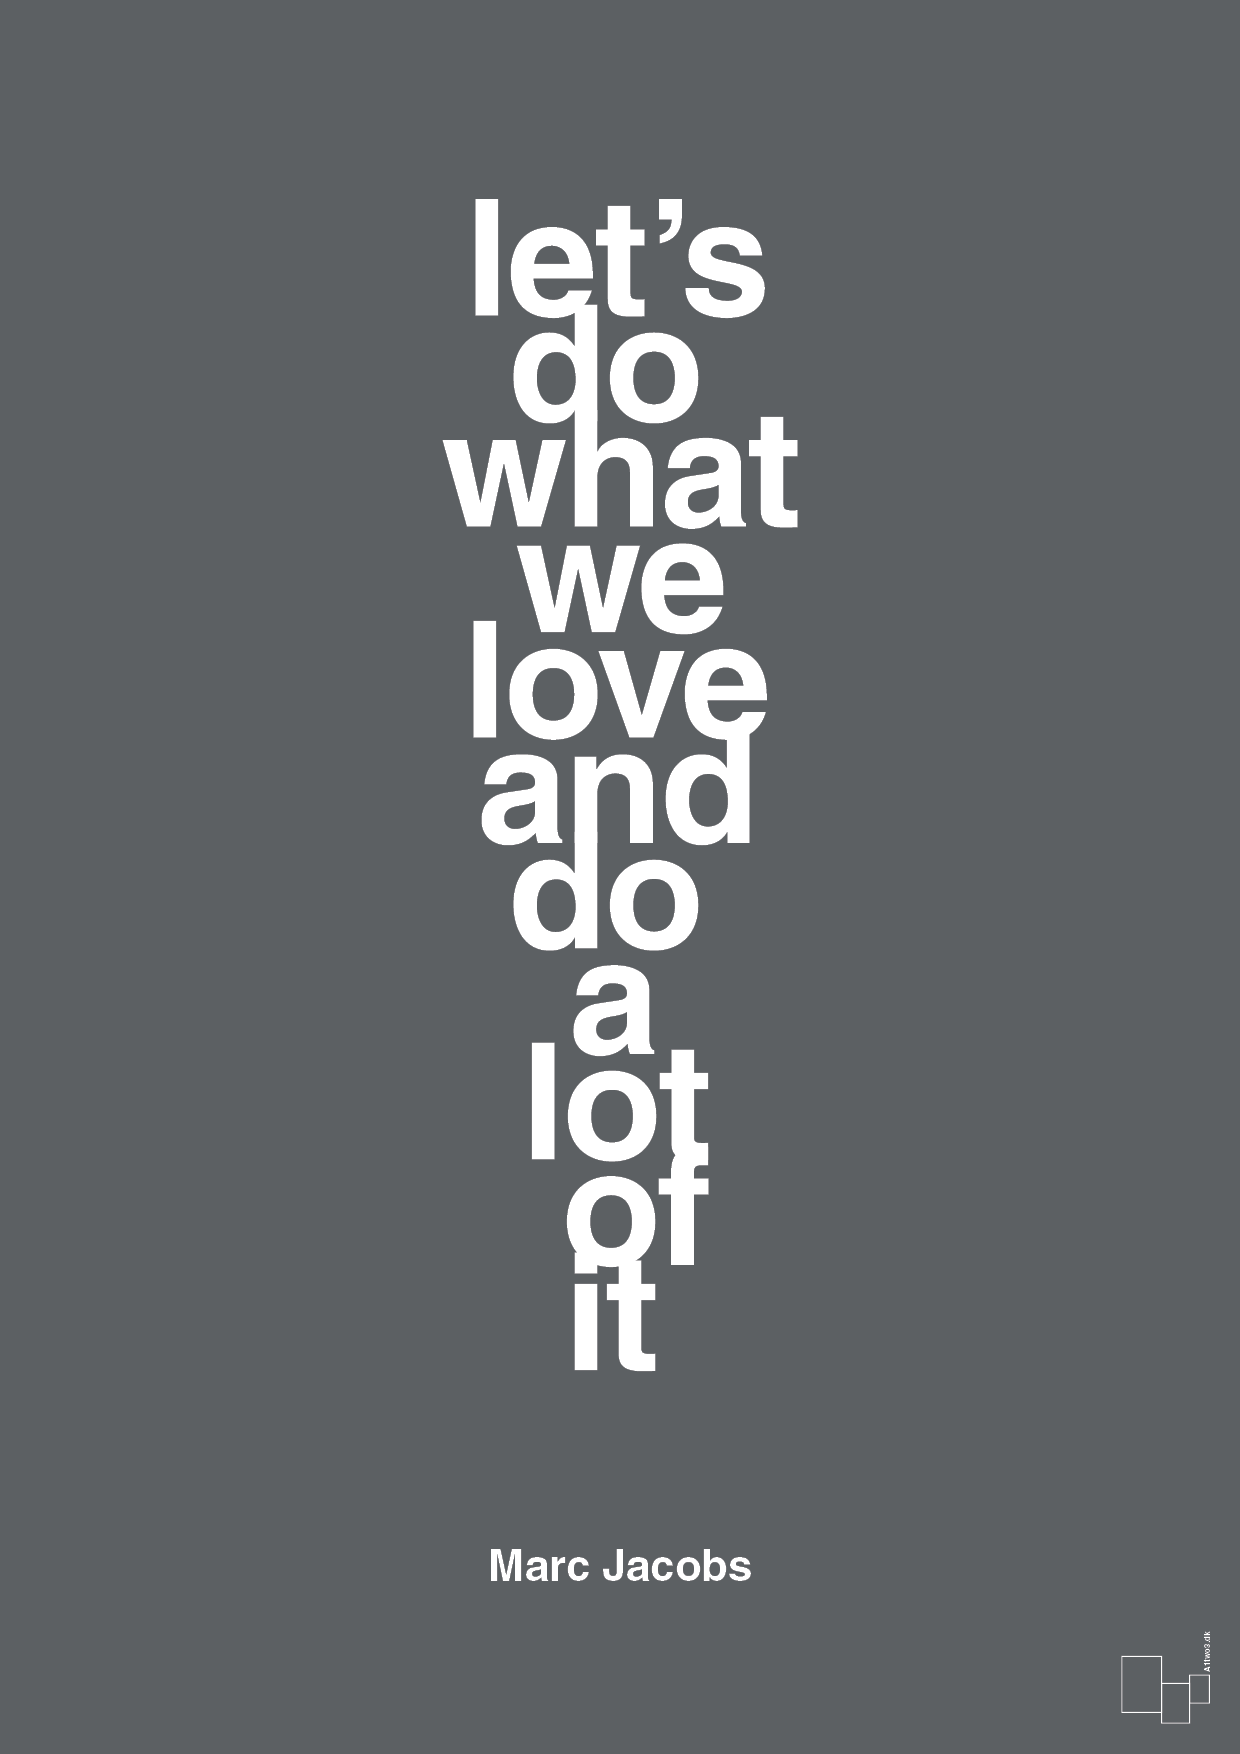 lets do what we love and do a lot of it - Plakat med Citater i Graphic Charcoal